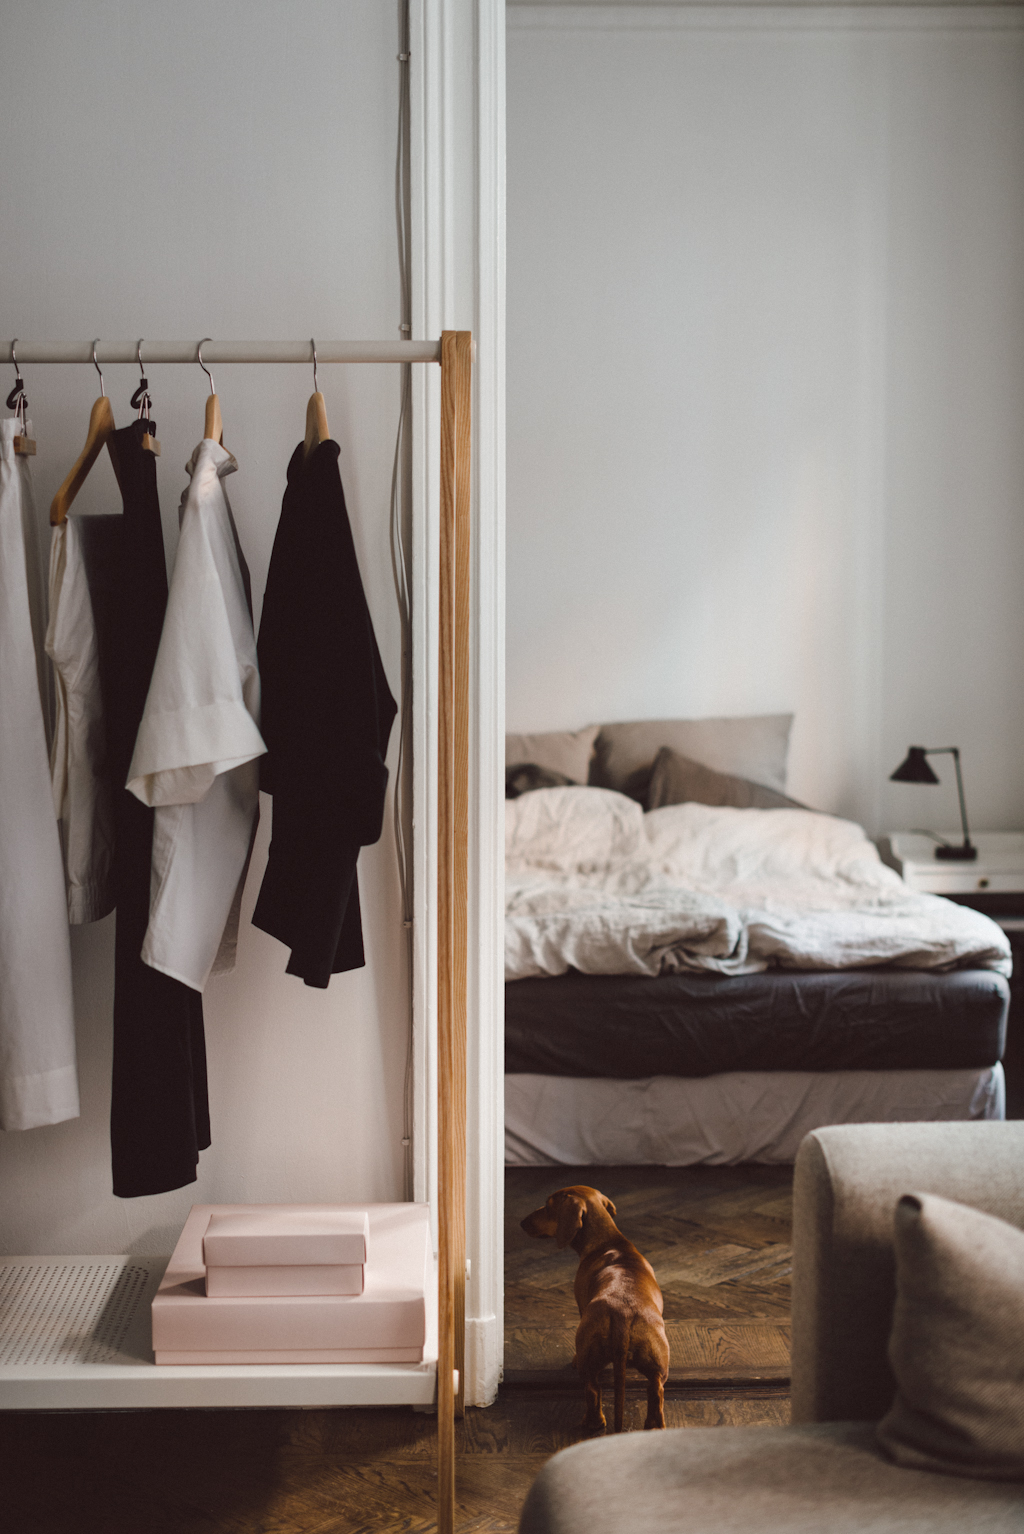 Sunday Stockholm by Babes in Boyland